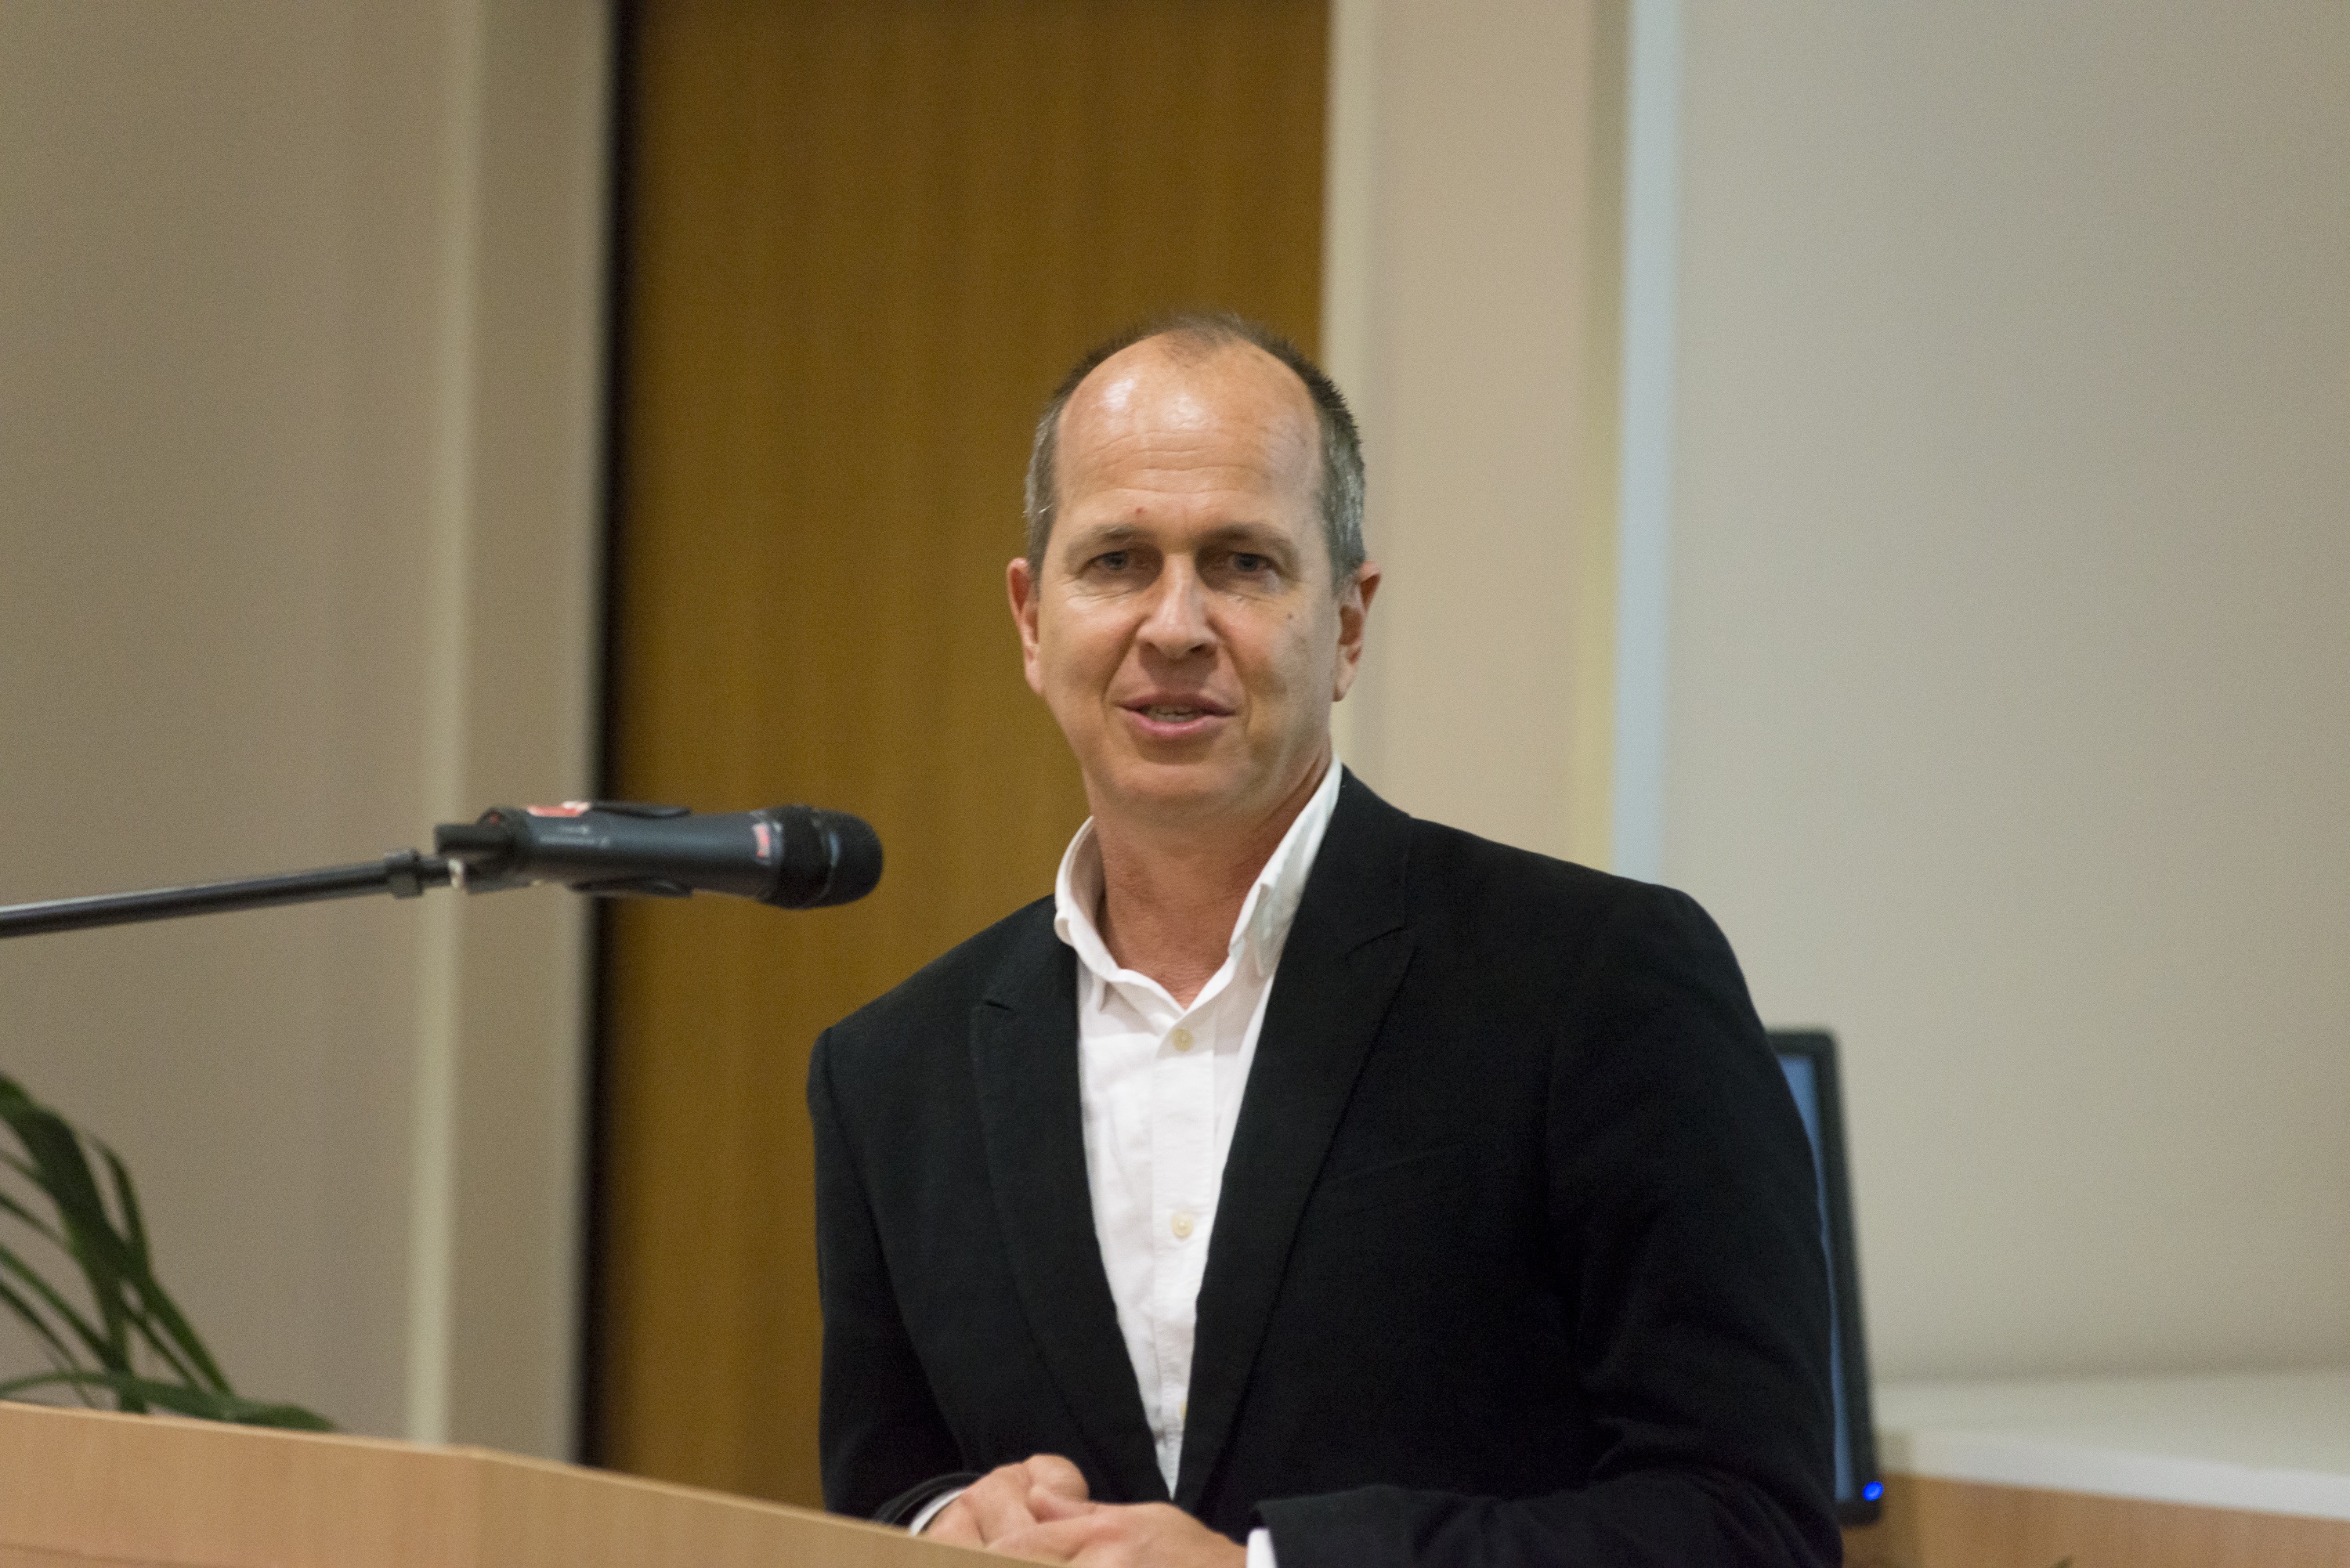 Peter Greste speaking at the launch of the Griffith Centre for Social and Cultural Research.